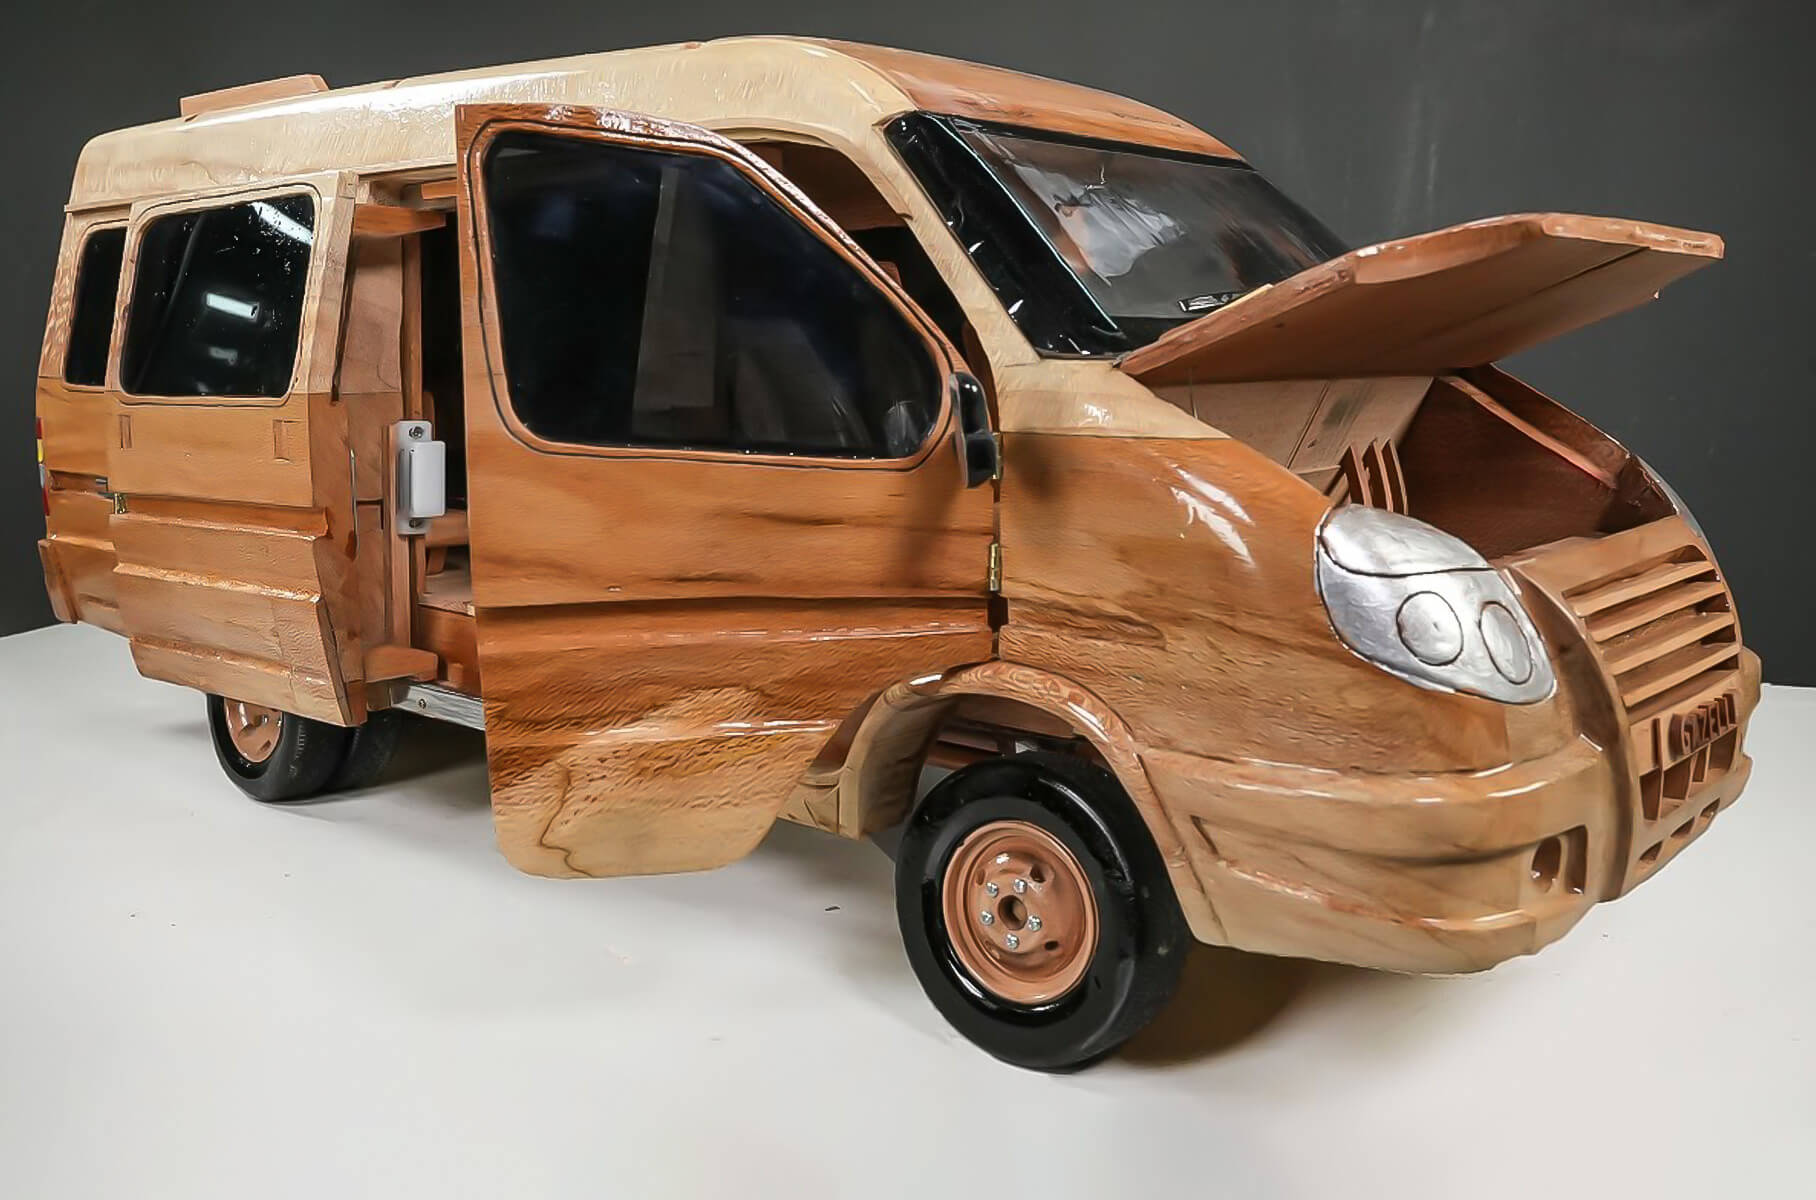 Cars made of wood that copy real models